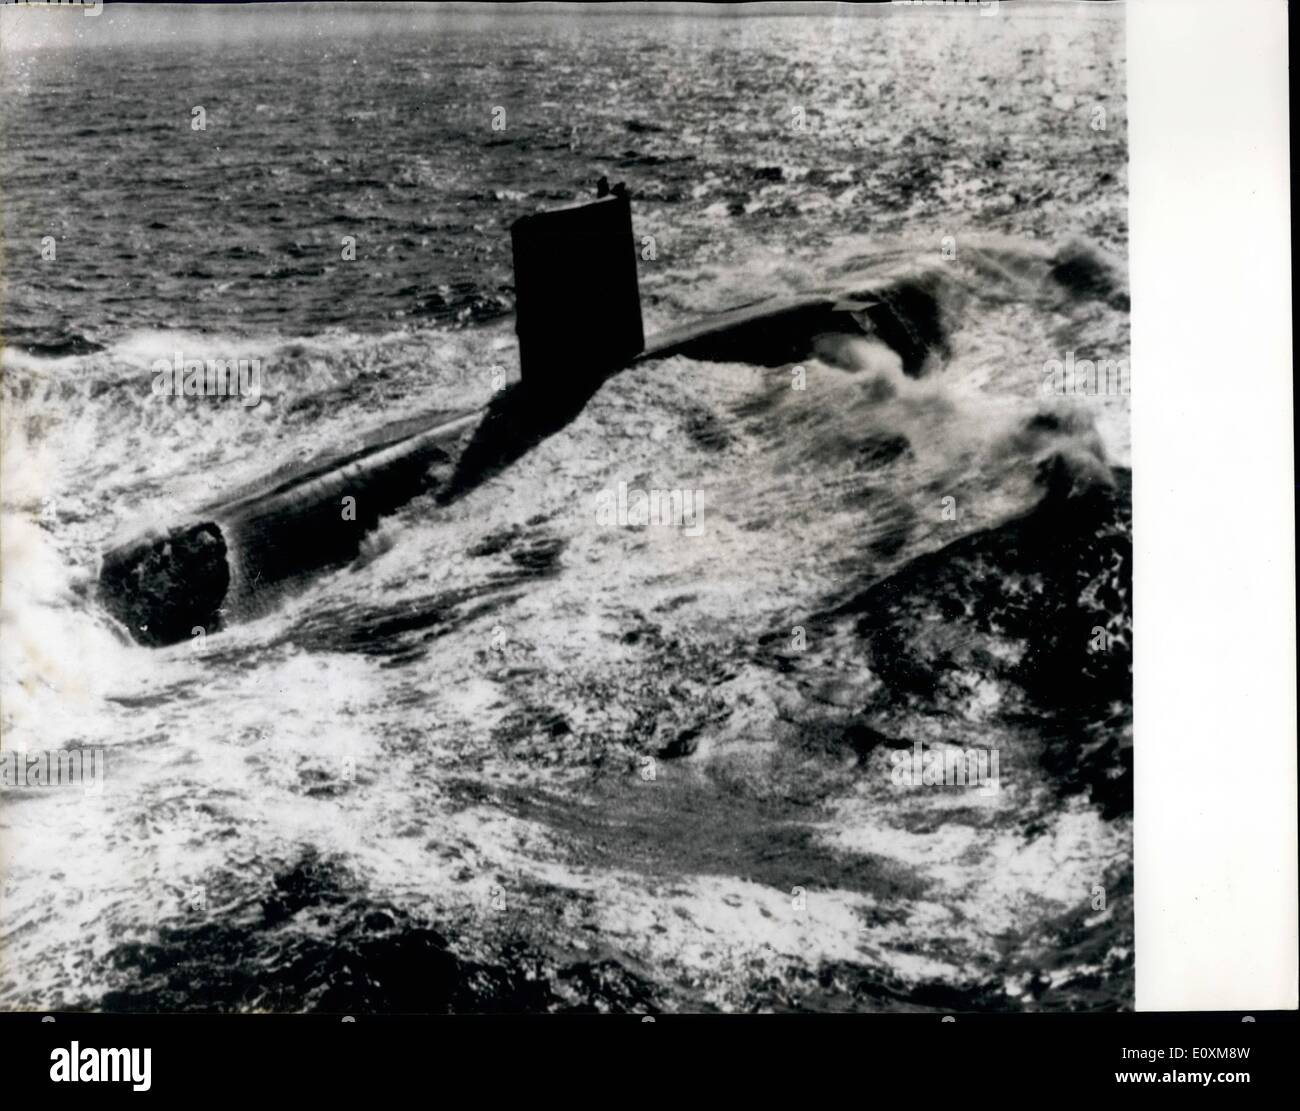 Apr. 04, 1967 - Nuclear Submarine Valiant Surfaces After Record Voyage From Singapore: H.M.S. Valiant (Commander Peter Herbert), the nuclear-powered submarine (3,500-tons), shown at speed after surfacing off North West Ireland, on completion of her 12,000-mile underwater voyage from Singapore - a record for a British submarine. Stock Photo